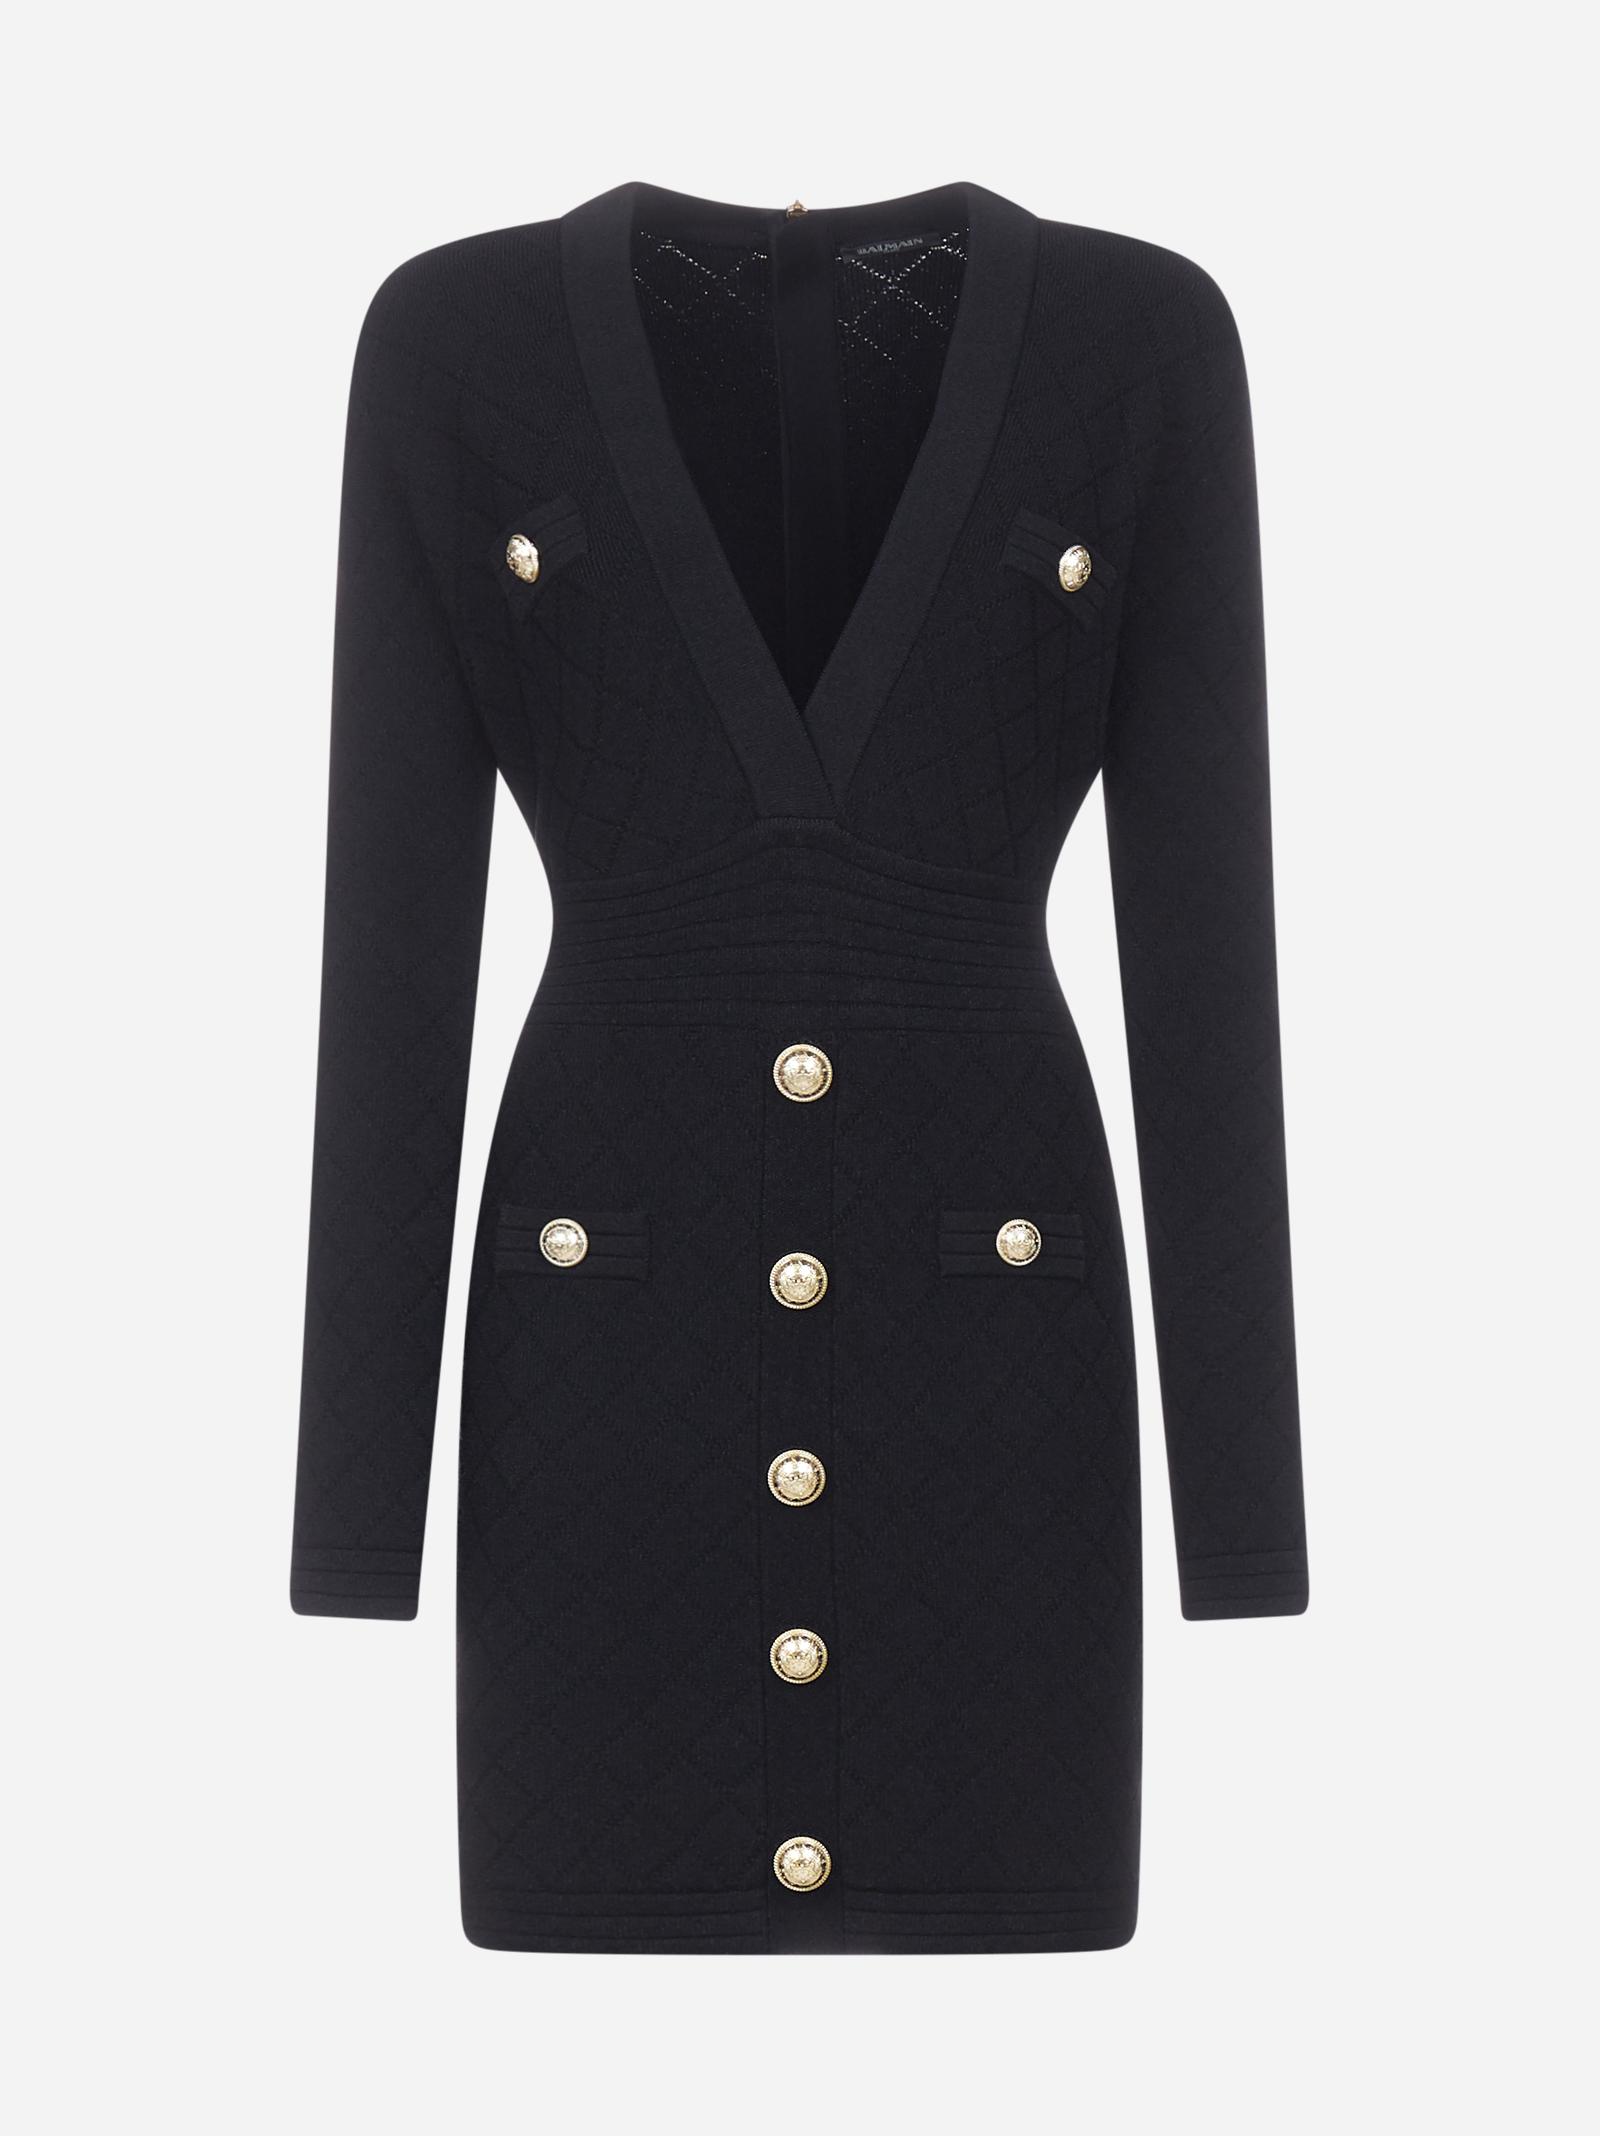 Balmain Synthetic Stretch Knit Mini-dress With Buttons in Black - Lyst